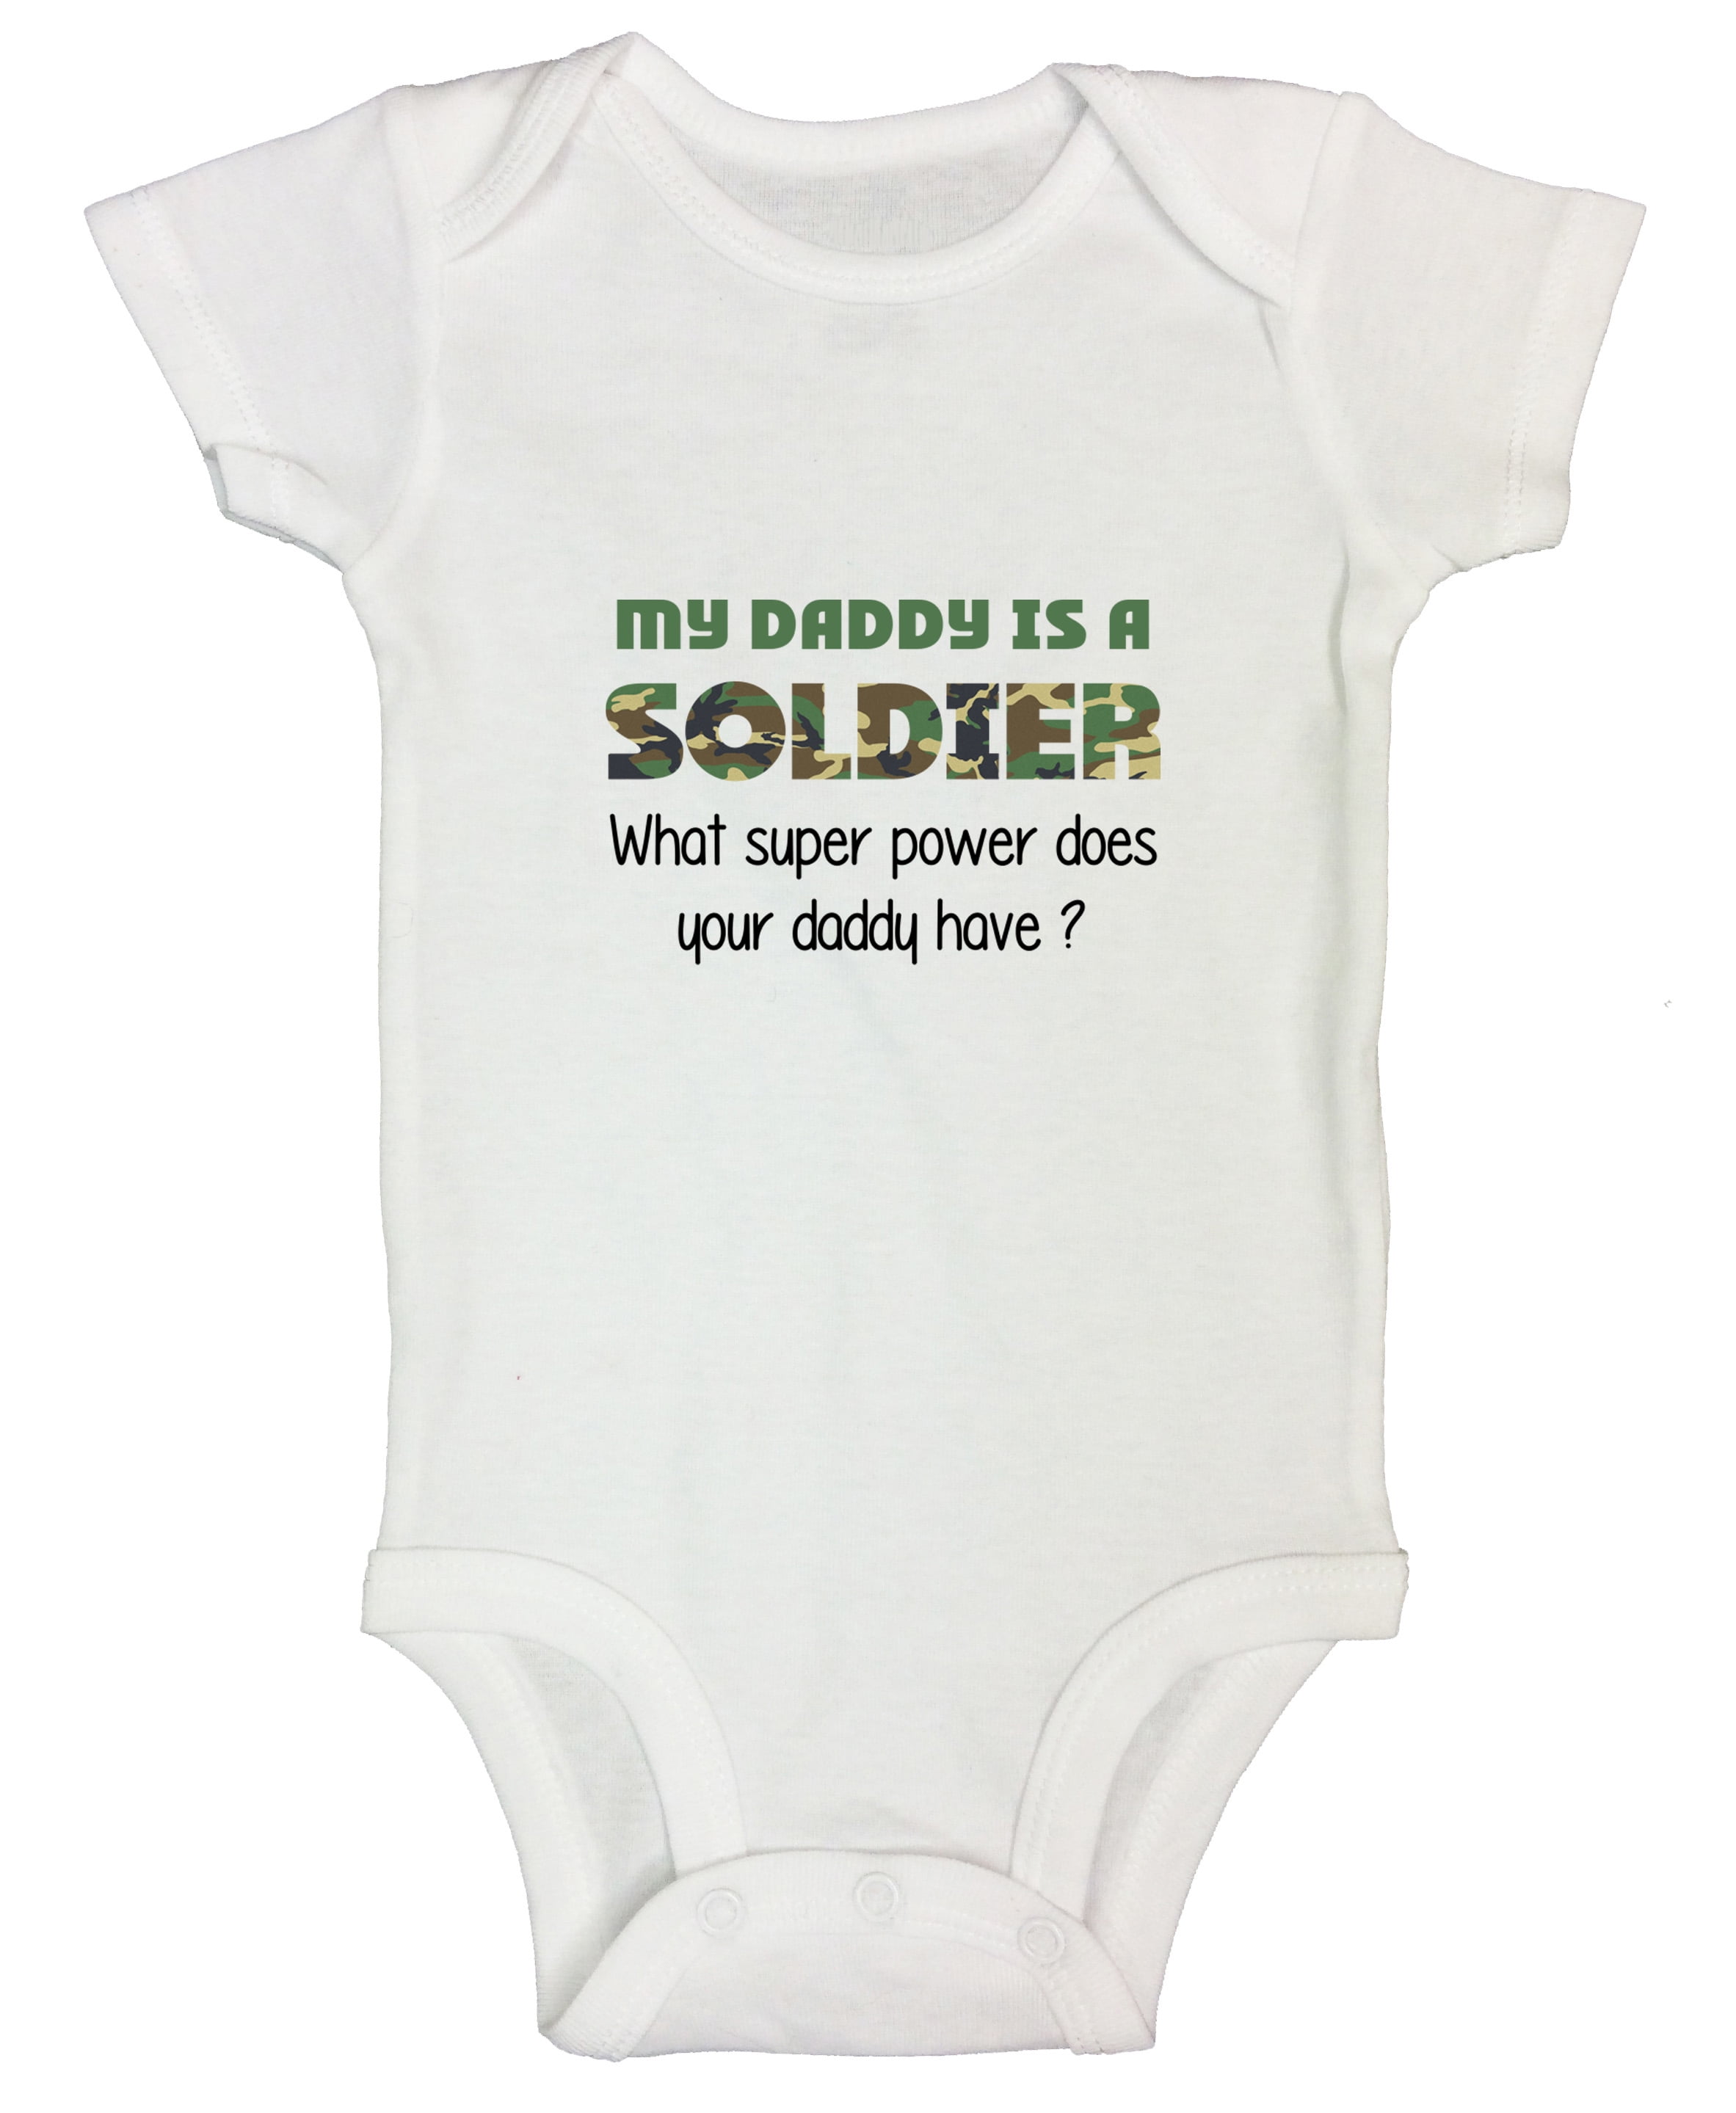 Baby Boys Girls Baby Grow Vest Bodysuit Short and Long Sleeve Mummy and Daddy/'s Little Miracle